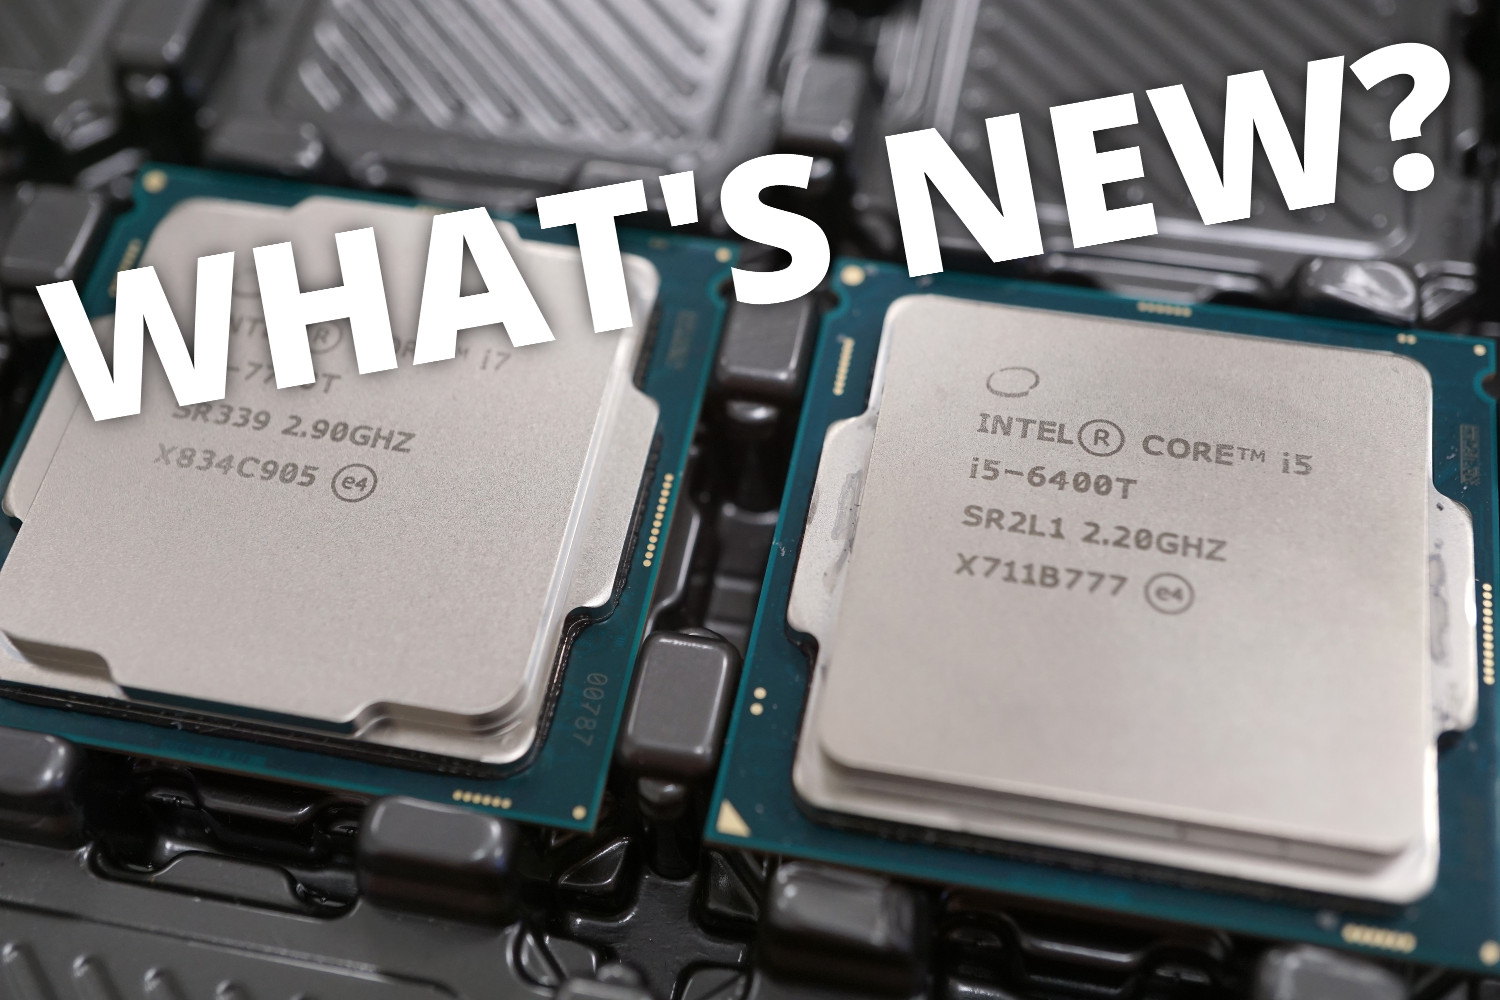 What’s New? Issue with Intel CPUs, AMD’s market share & eMMC for IPCs